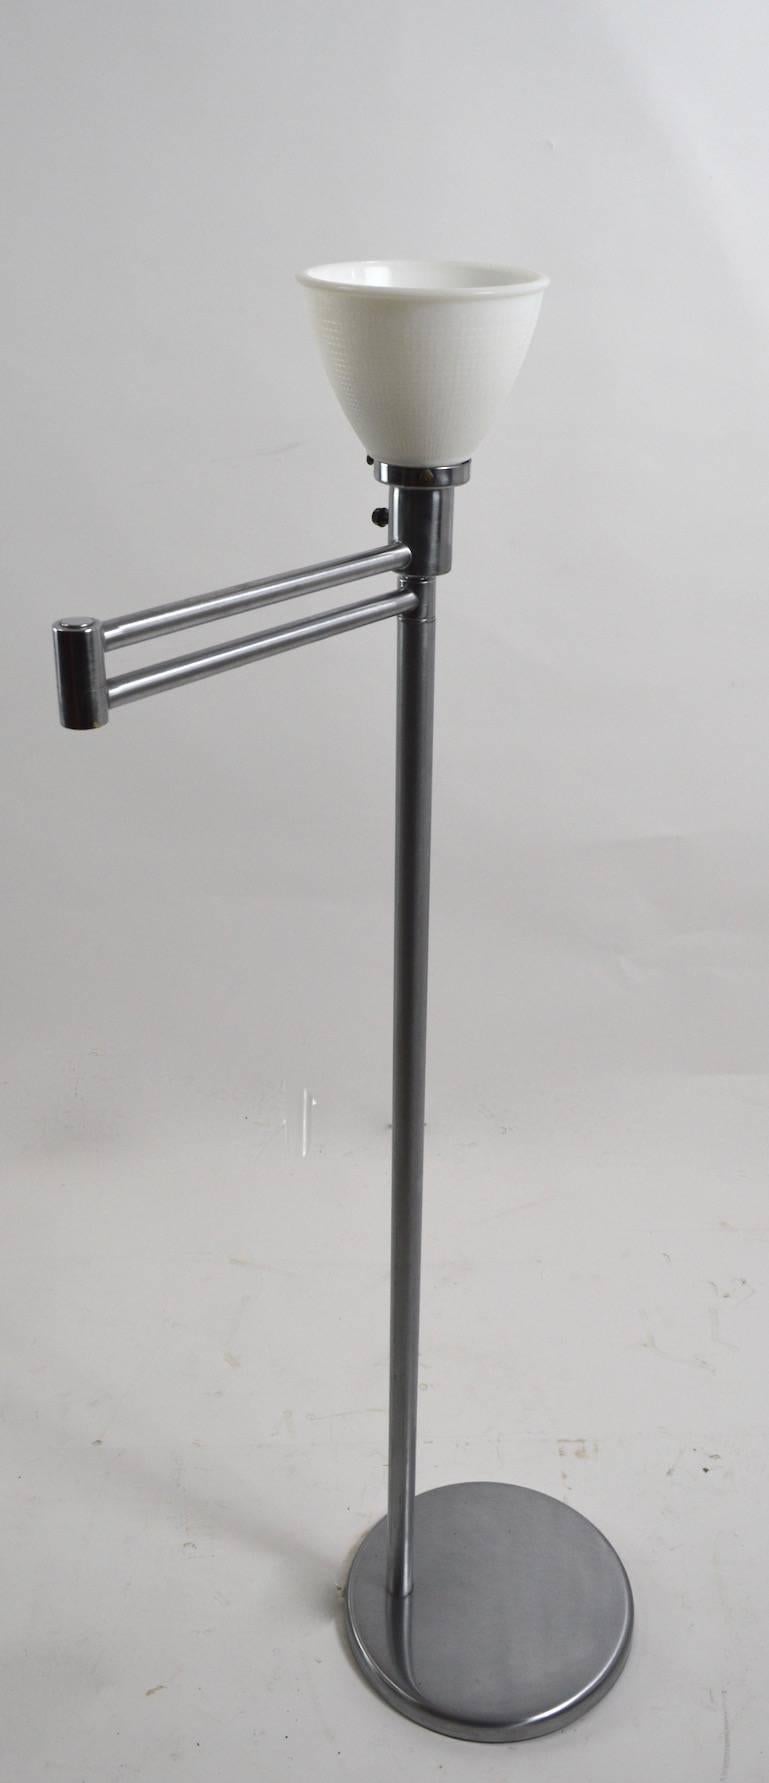 Classic flex arm floor lamp by Walter Von Nessen in clean, original, working condition.
Iconic design, exceptional quality construction. Slight dents to base.
Each segment of the swing arm is 12 inches (total extended length 24 inches).
This